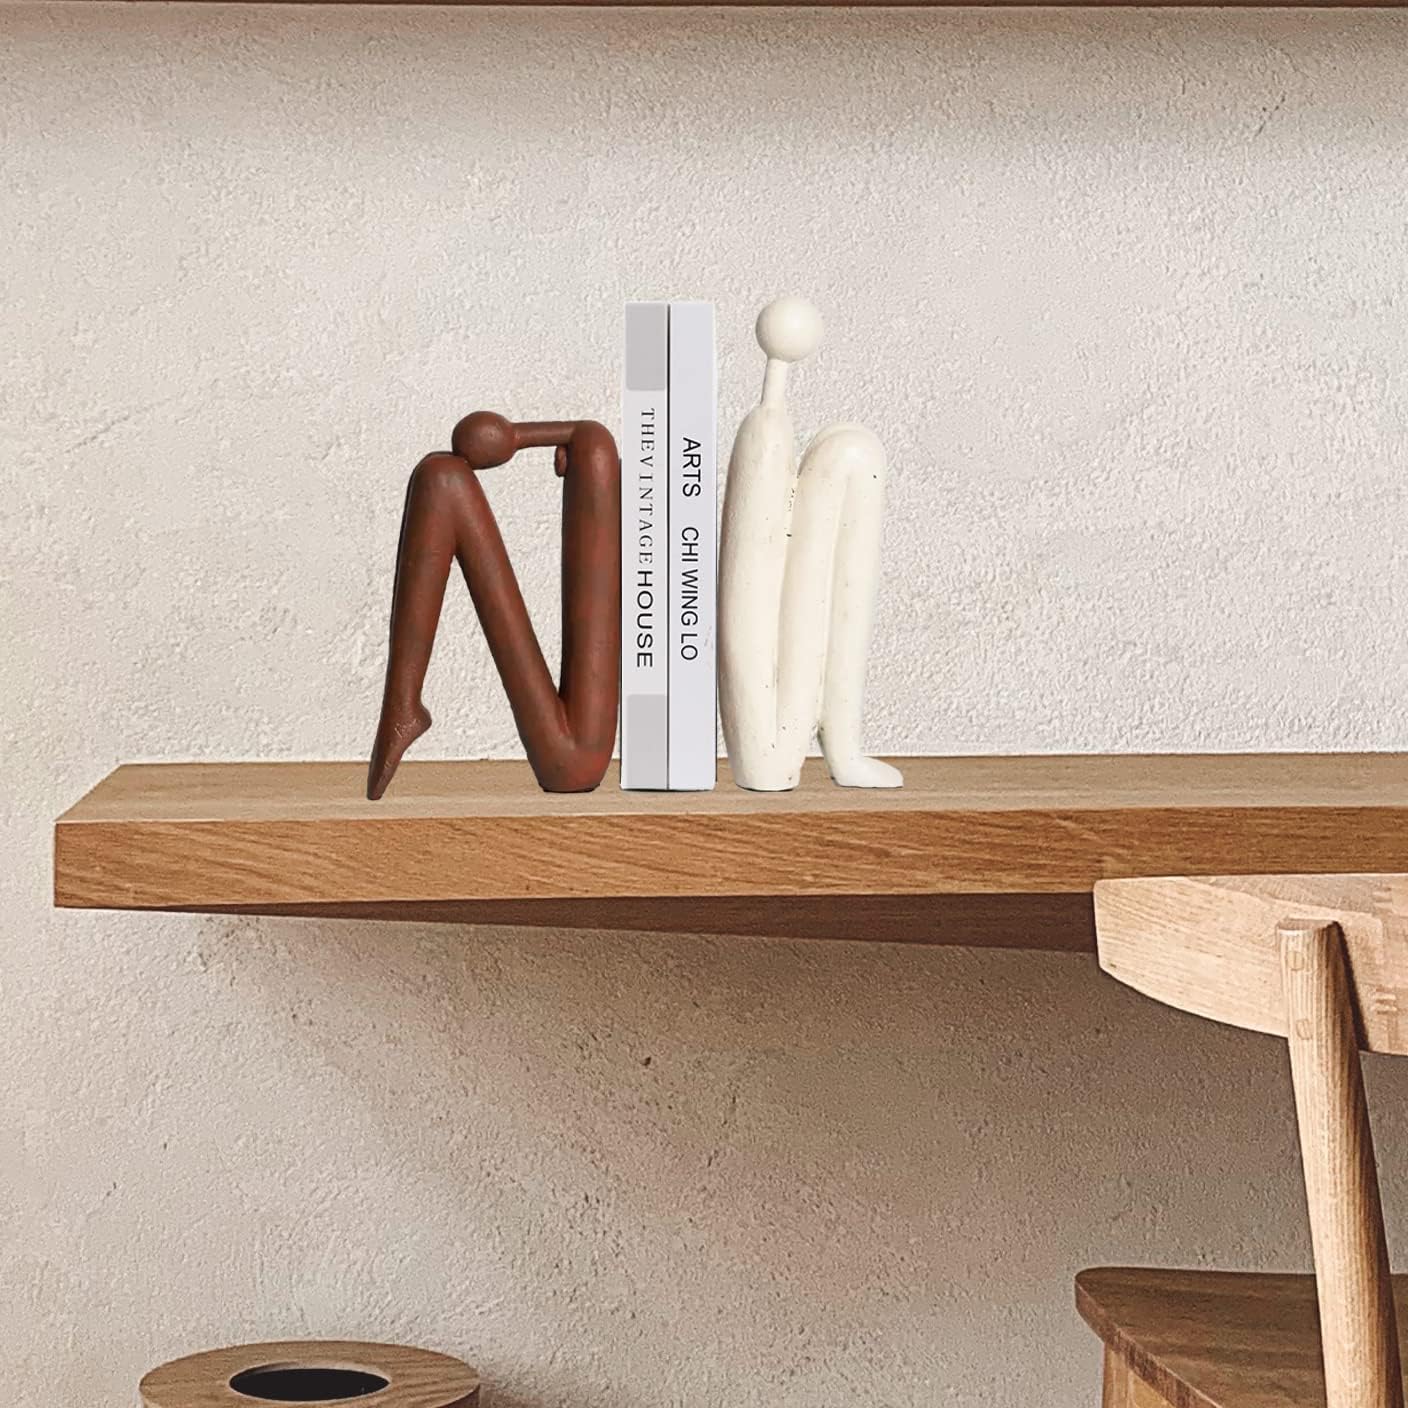 Product Of The Week: Beautiful Human Shaped Bookends